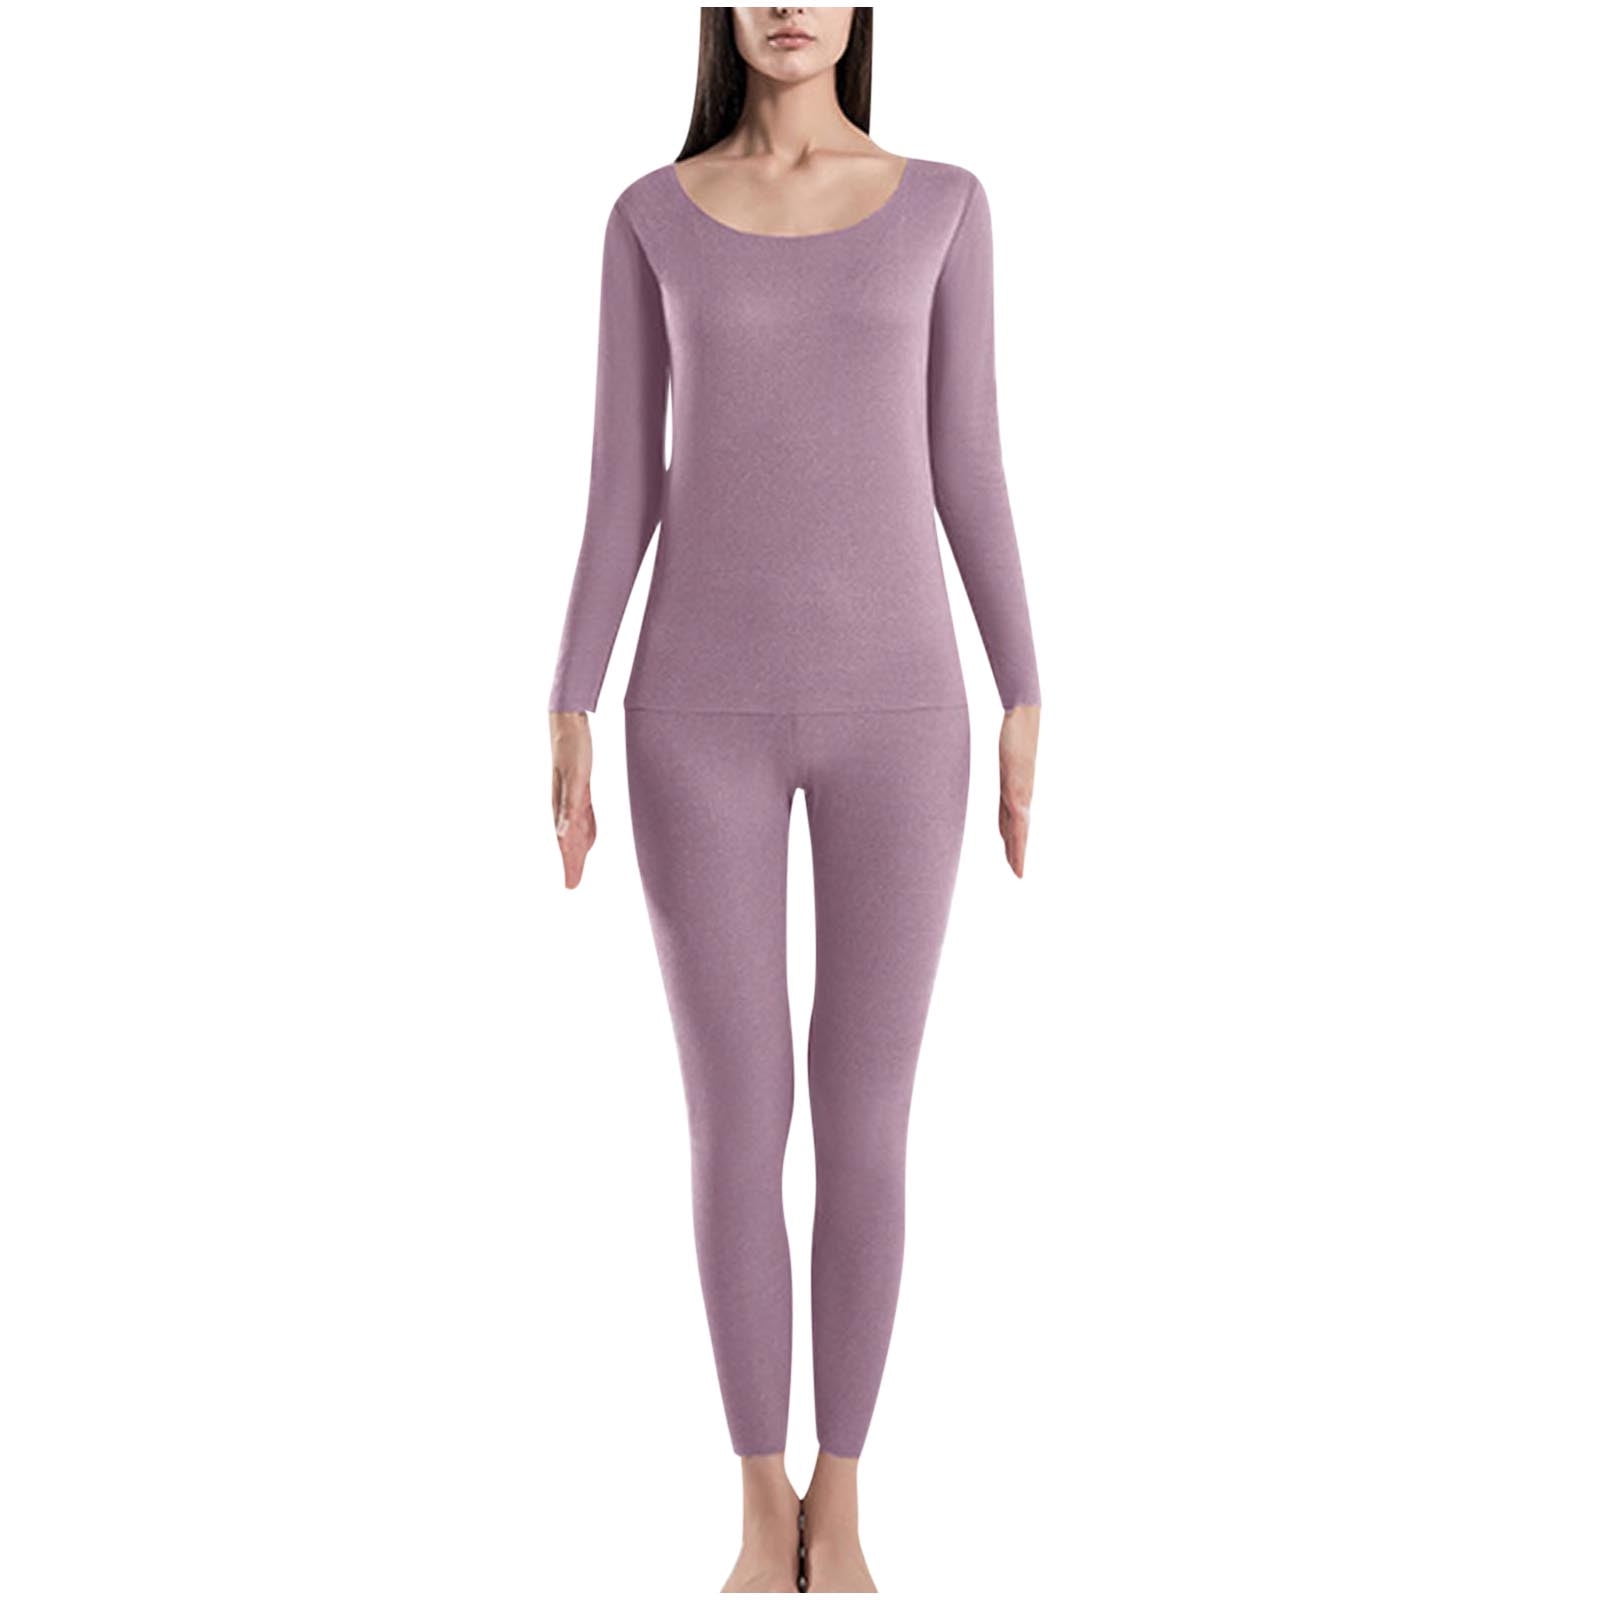 Lingerie, 'Snowdon' Spot Thermal Base Layer Roll Neck